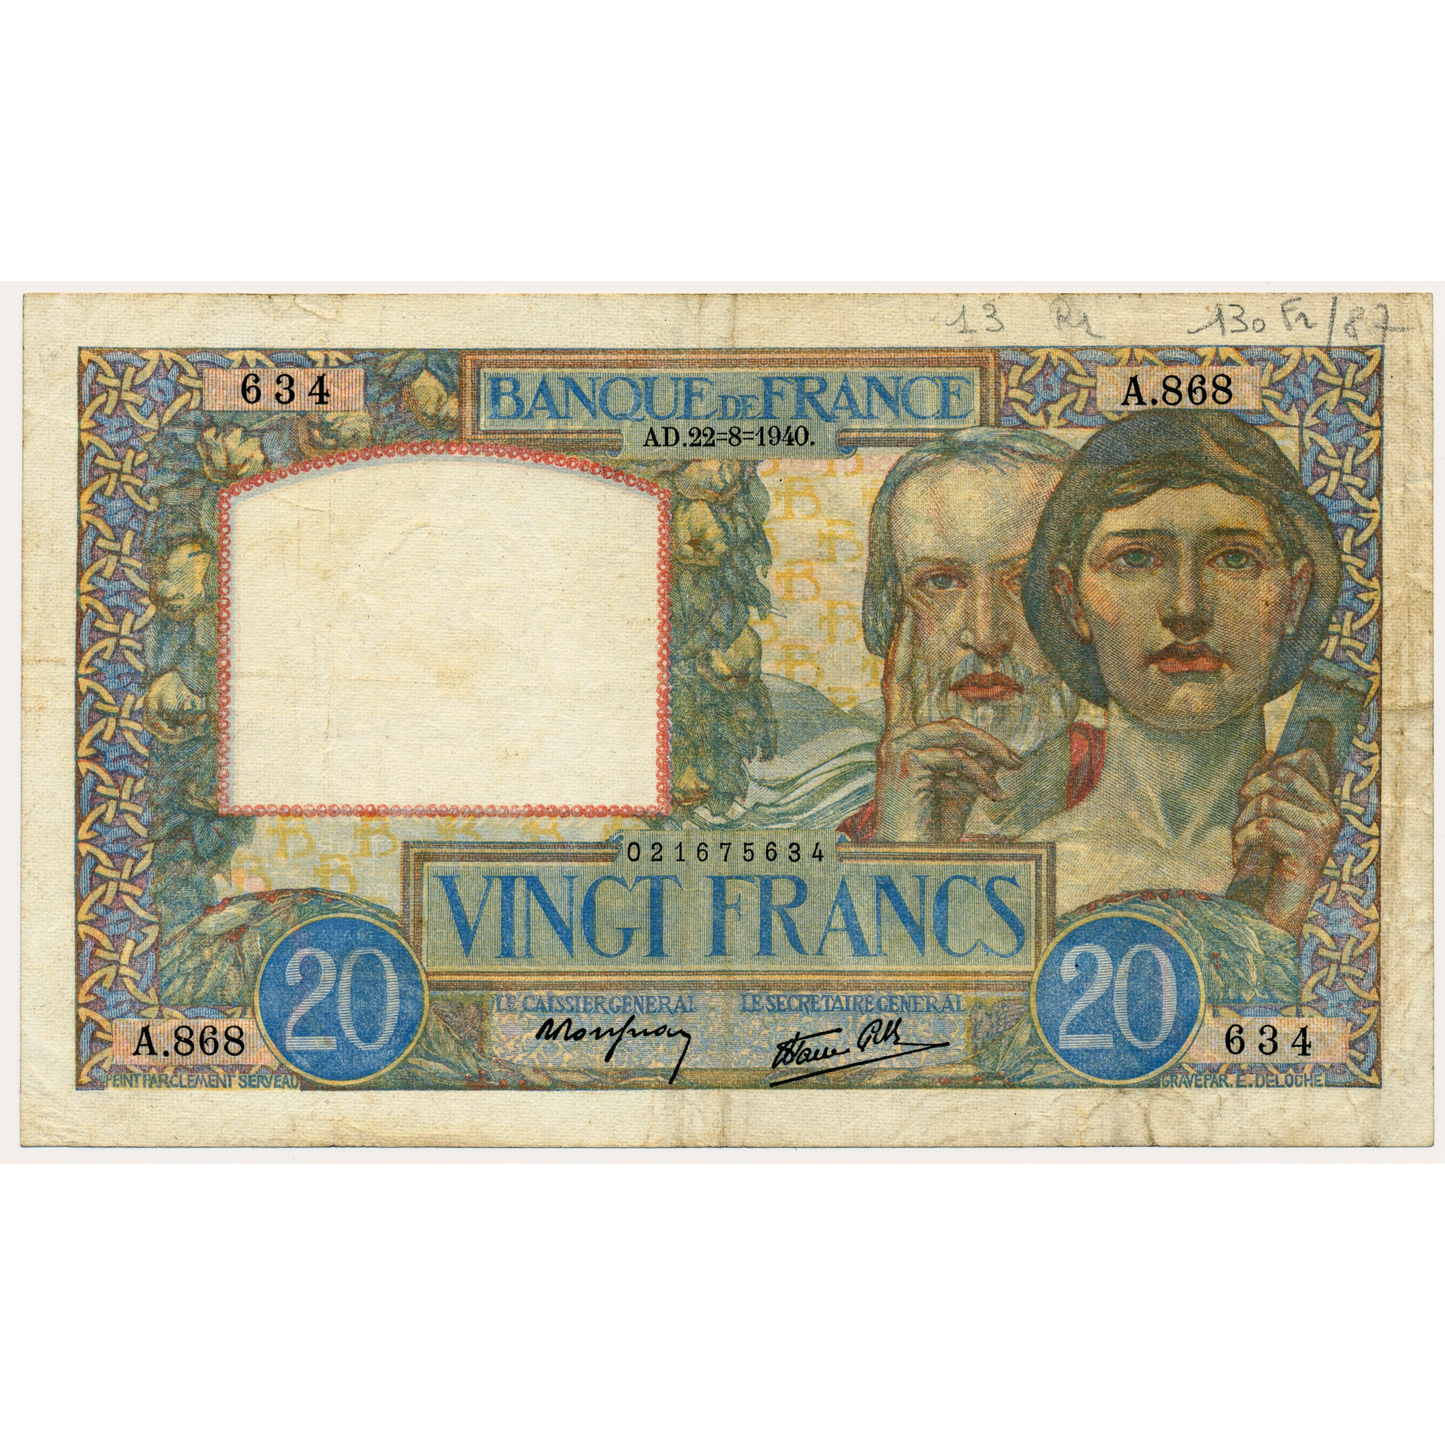 FRANCE P.92a 1940 20Fr Rousseau, Favre-Gilly VF